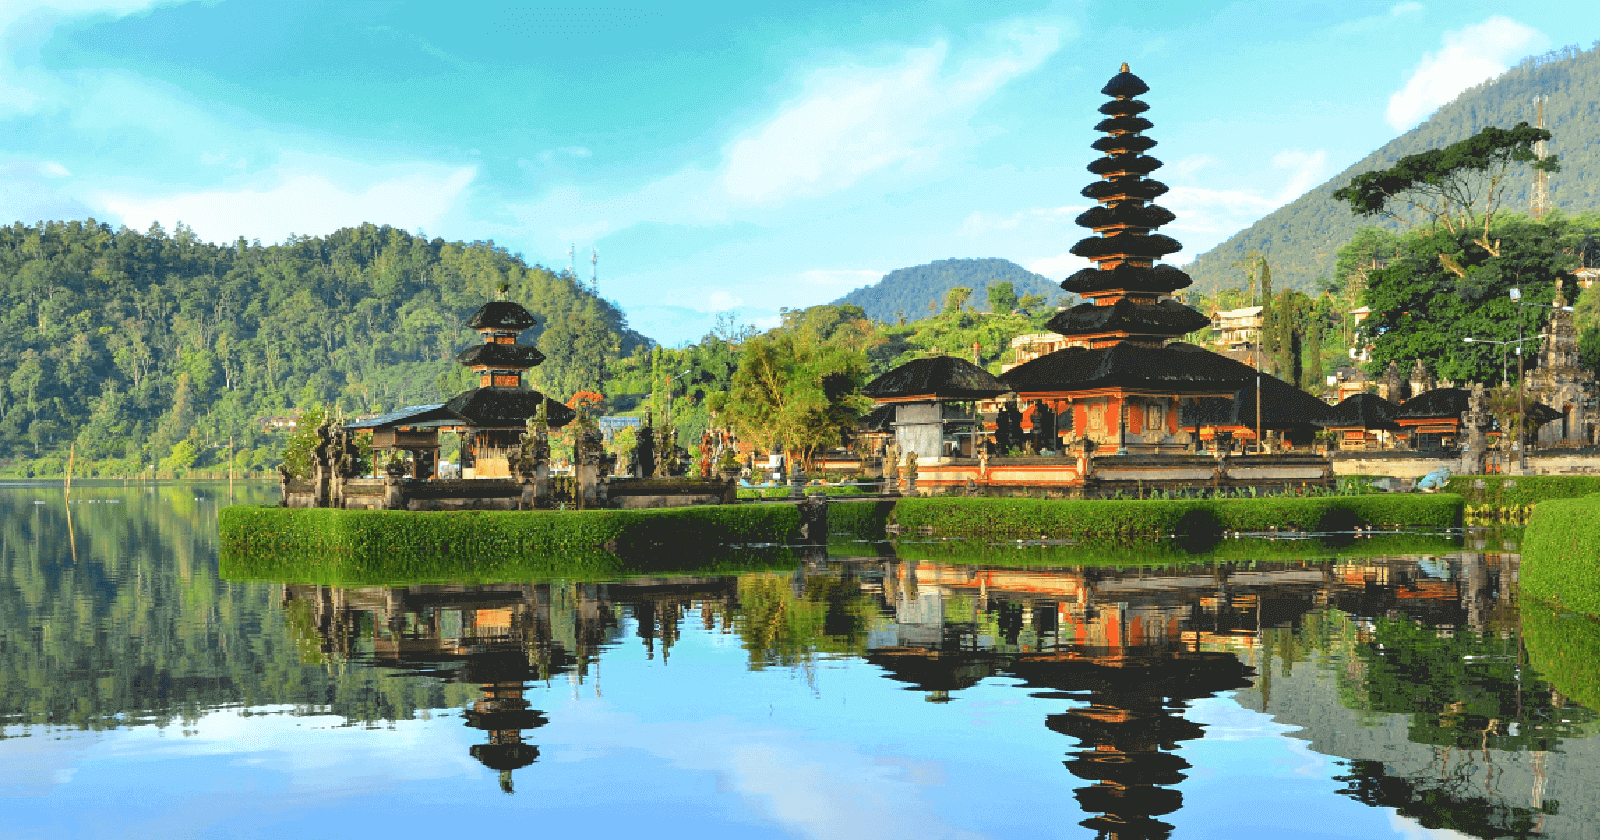 is it good time to visit bali in may